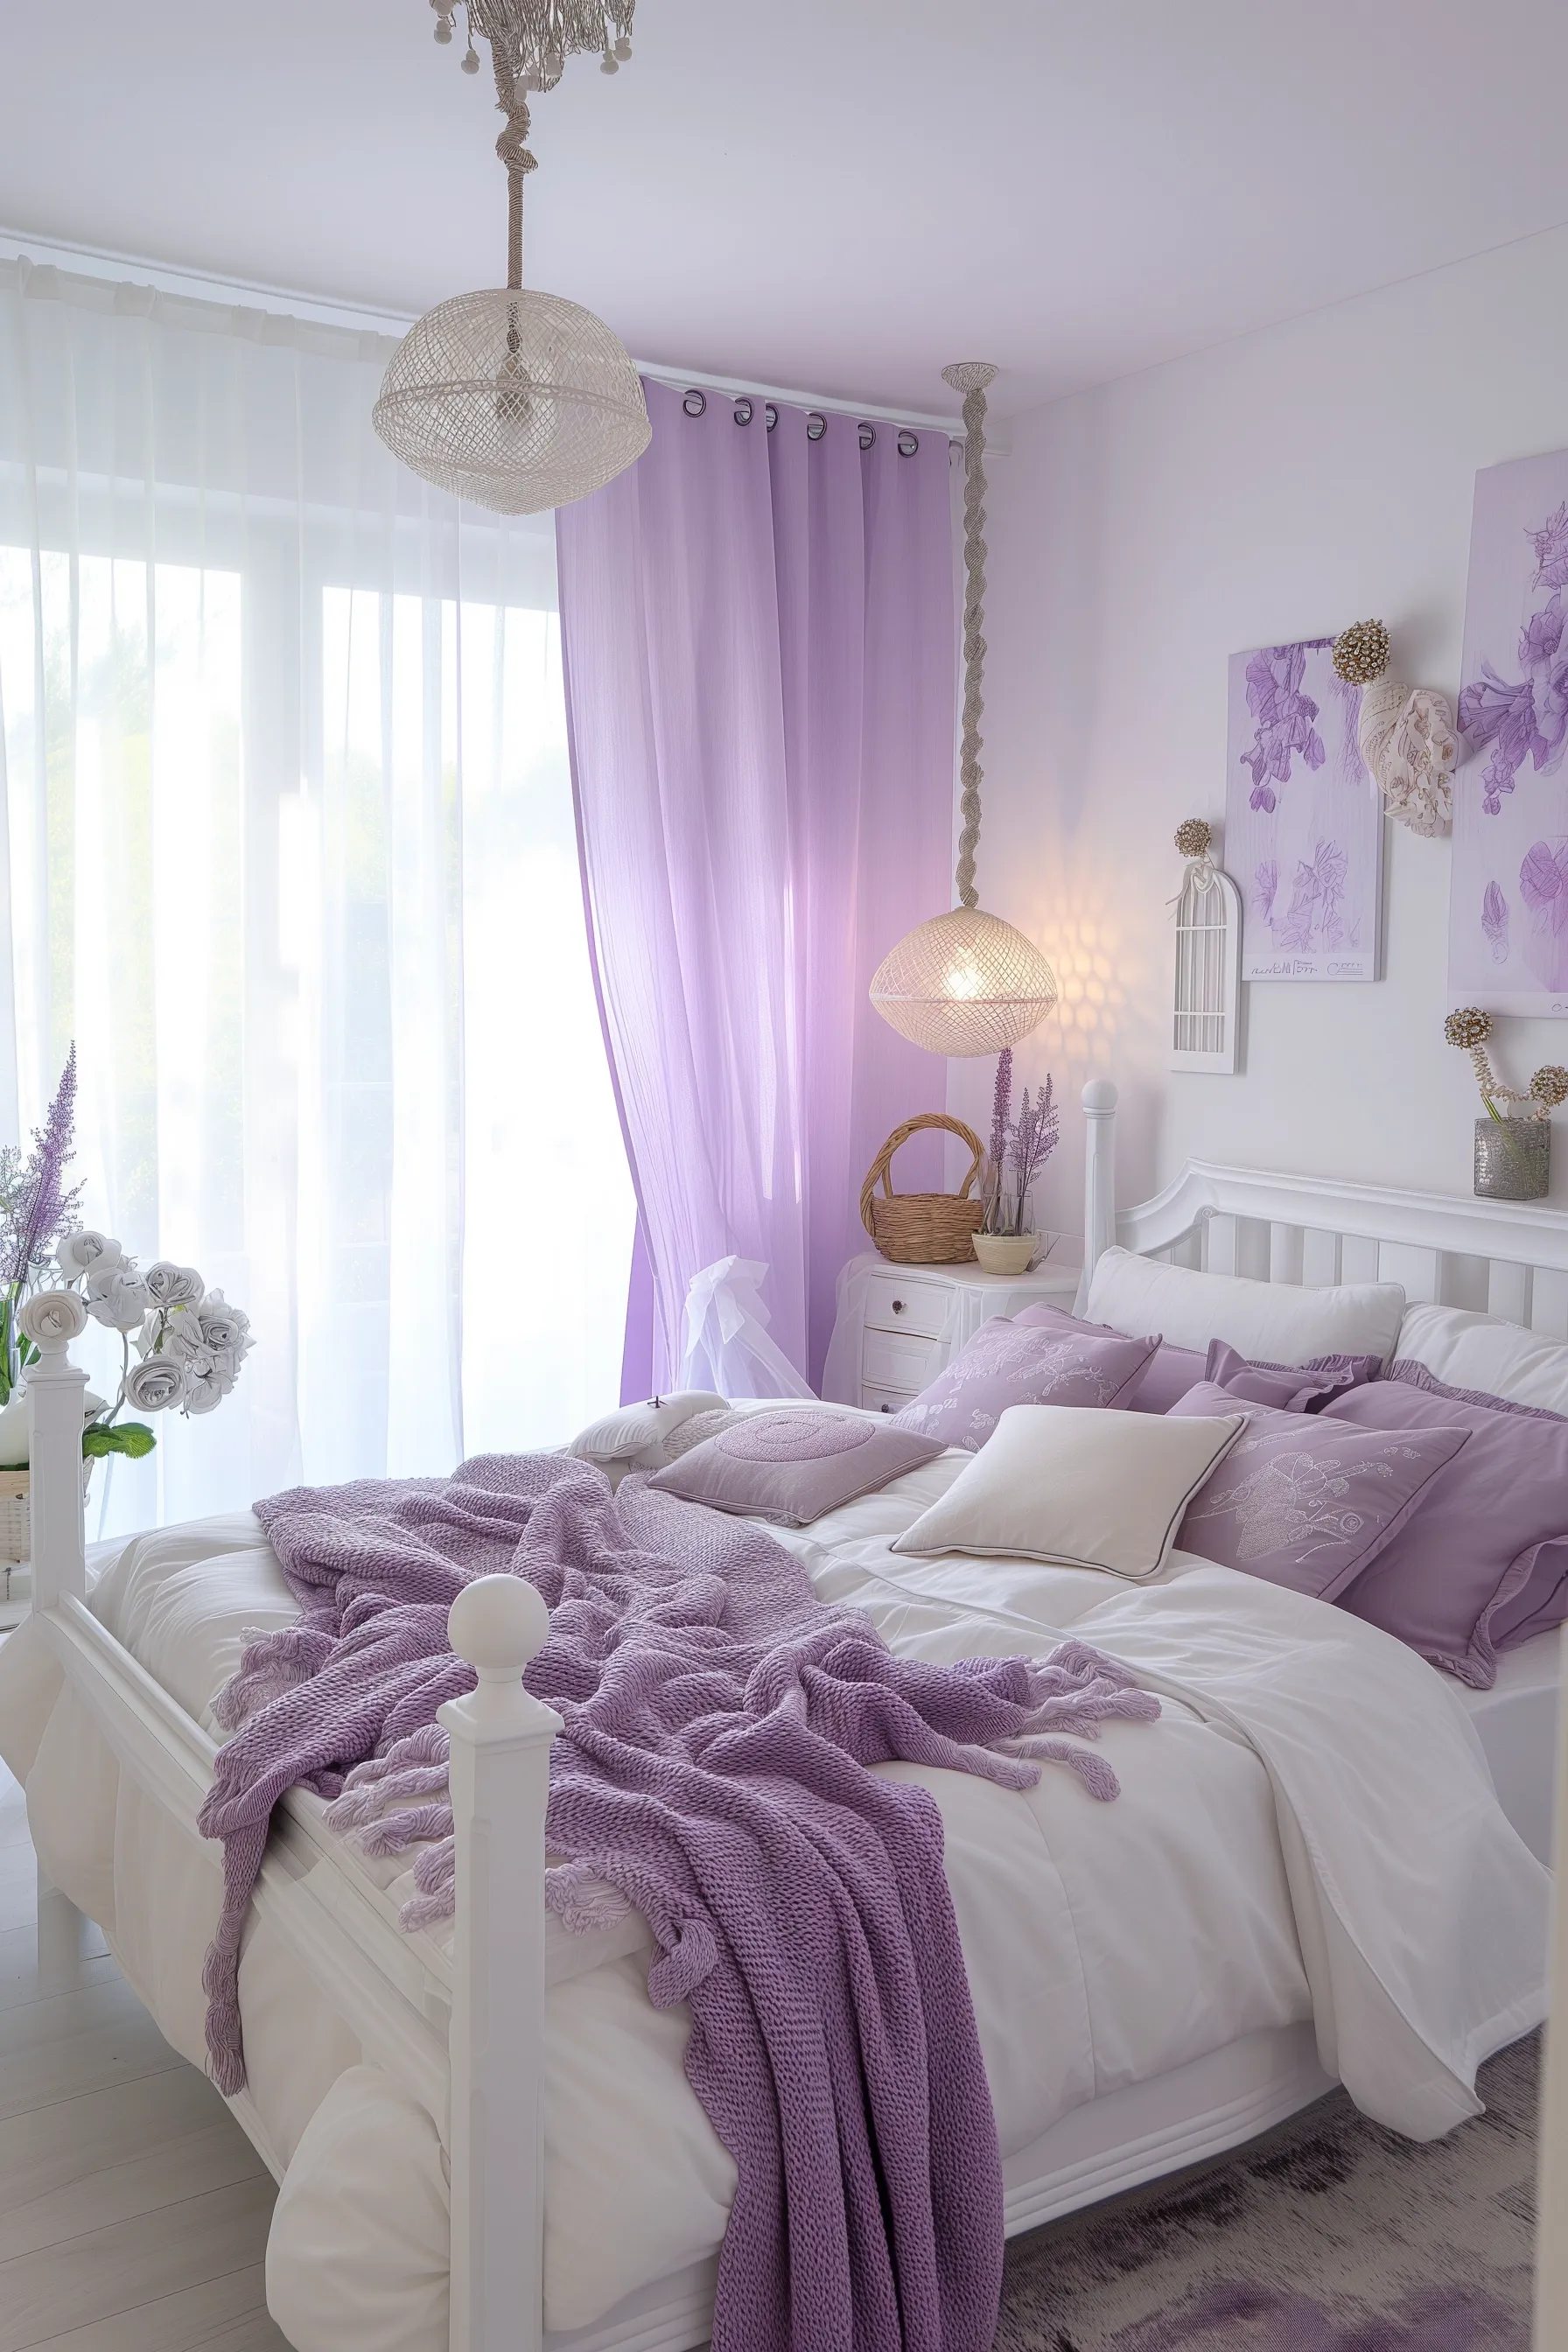 A purple and white bedroom with pillows, throws and flowers